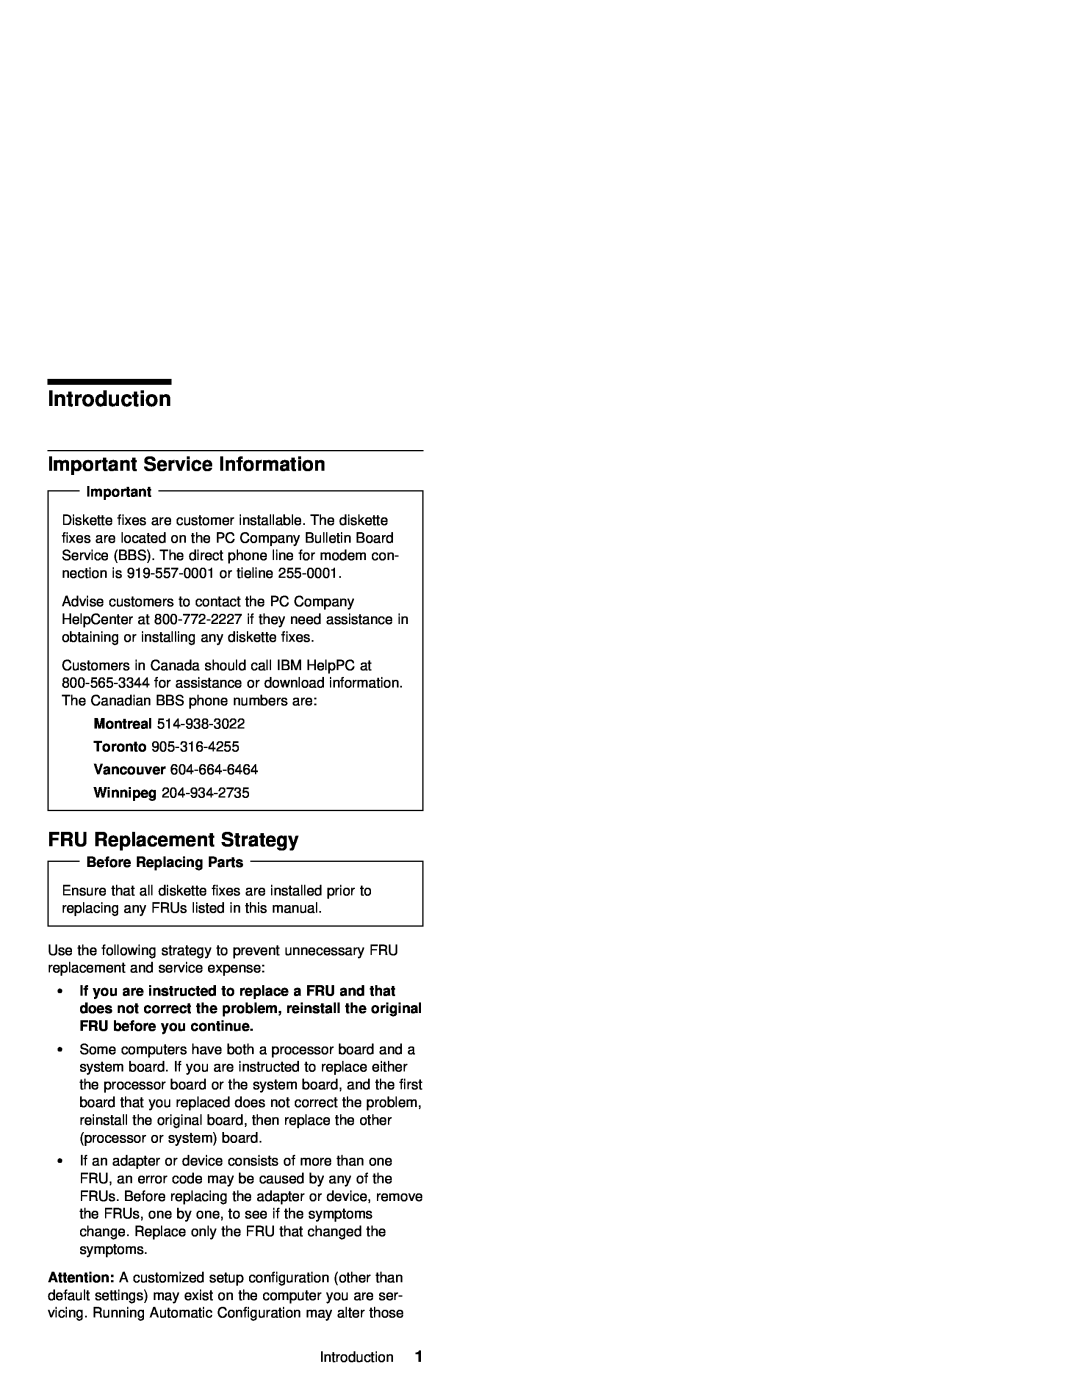 IBM 1400 (2611) manual Introduction, Important Service Information, FRU Replacement Strategy 